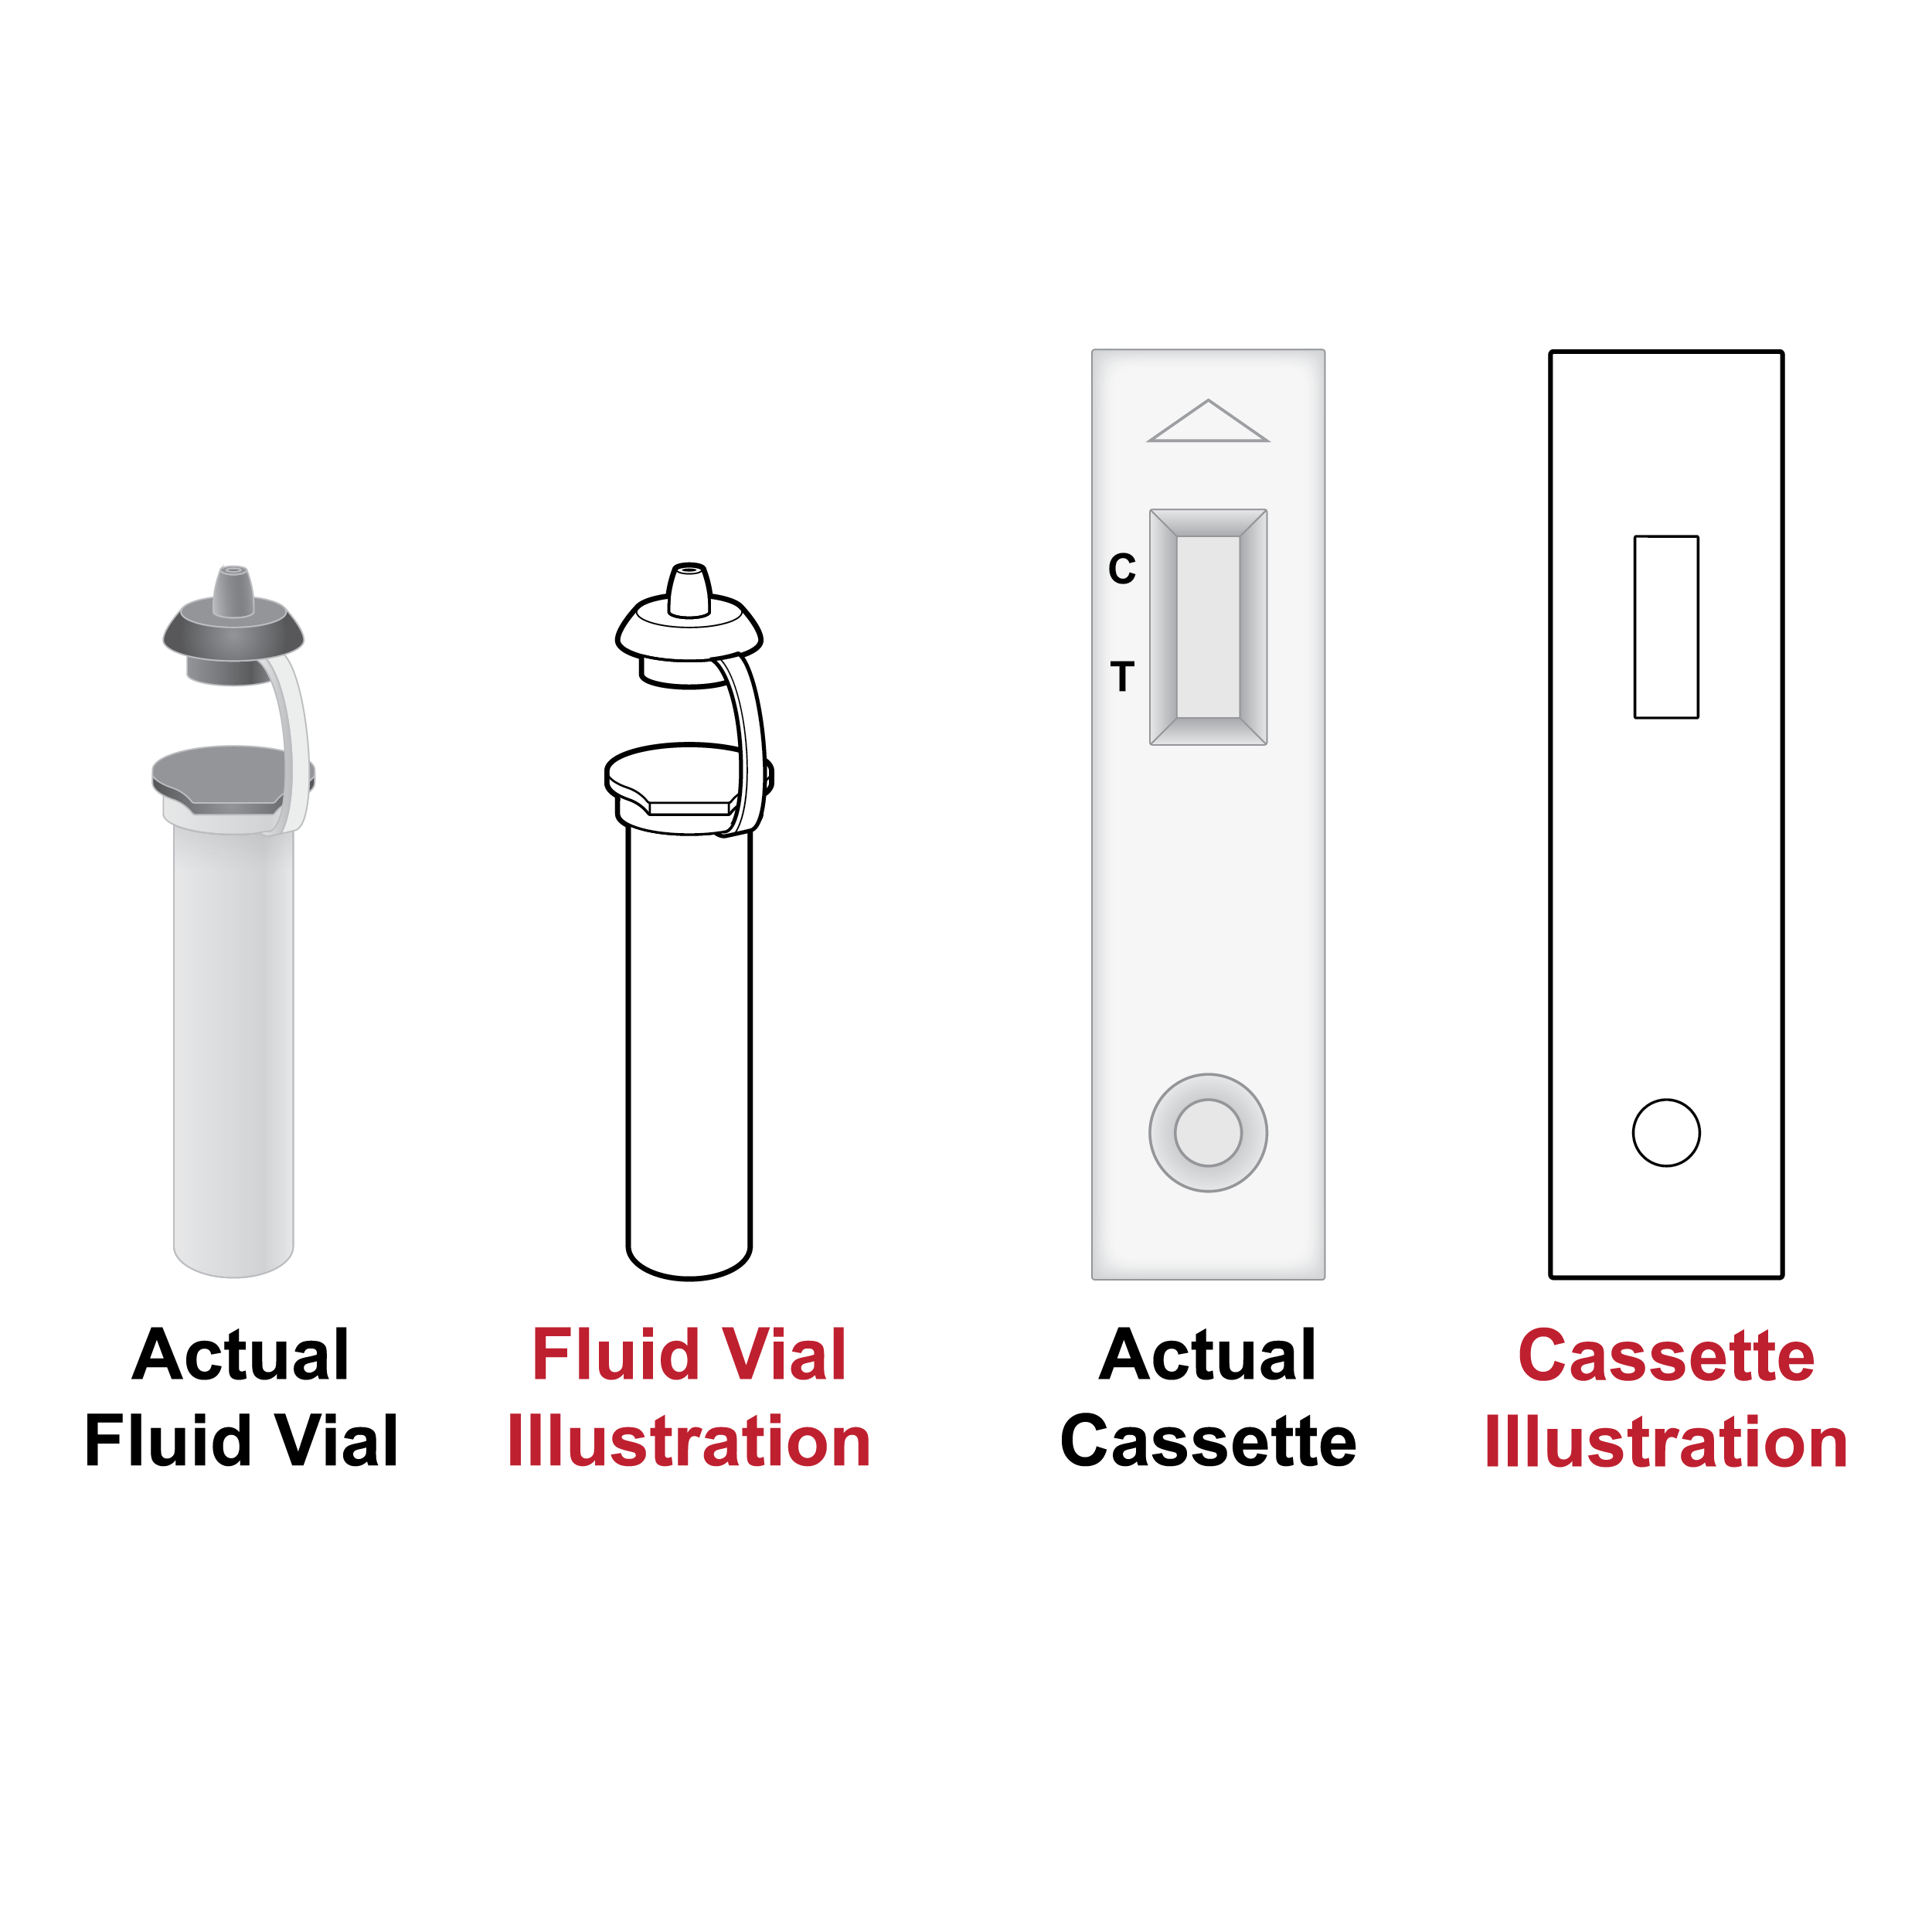 Side-by-side representations of an actual fluid vial and cassette with drawn versions of each. The cap in the drawn fluid vial illustration is incorrectly colored and the drawn cassette lacks the markings found on the actual cassette.